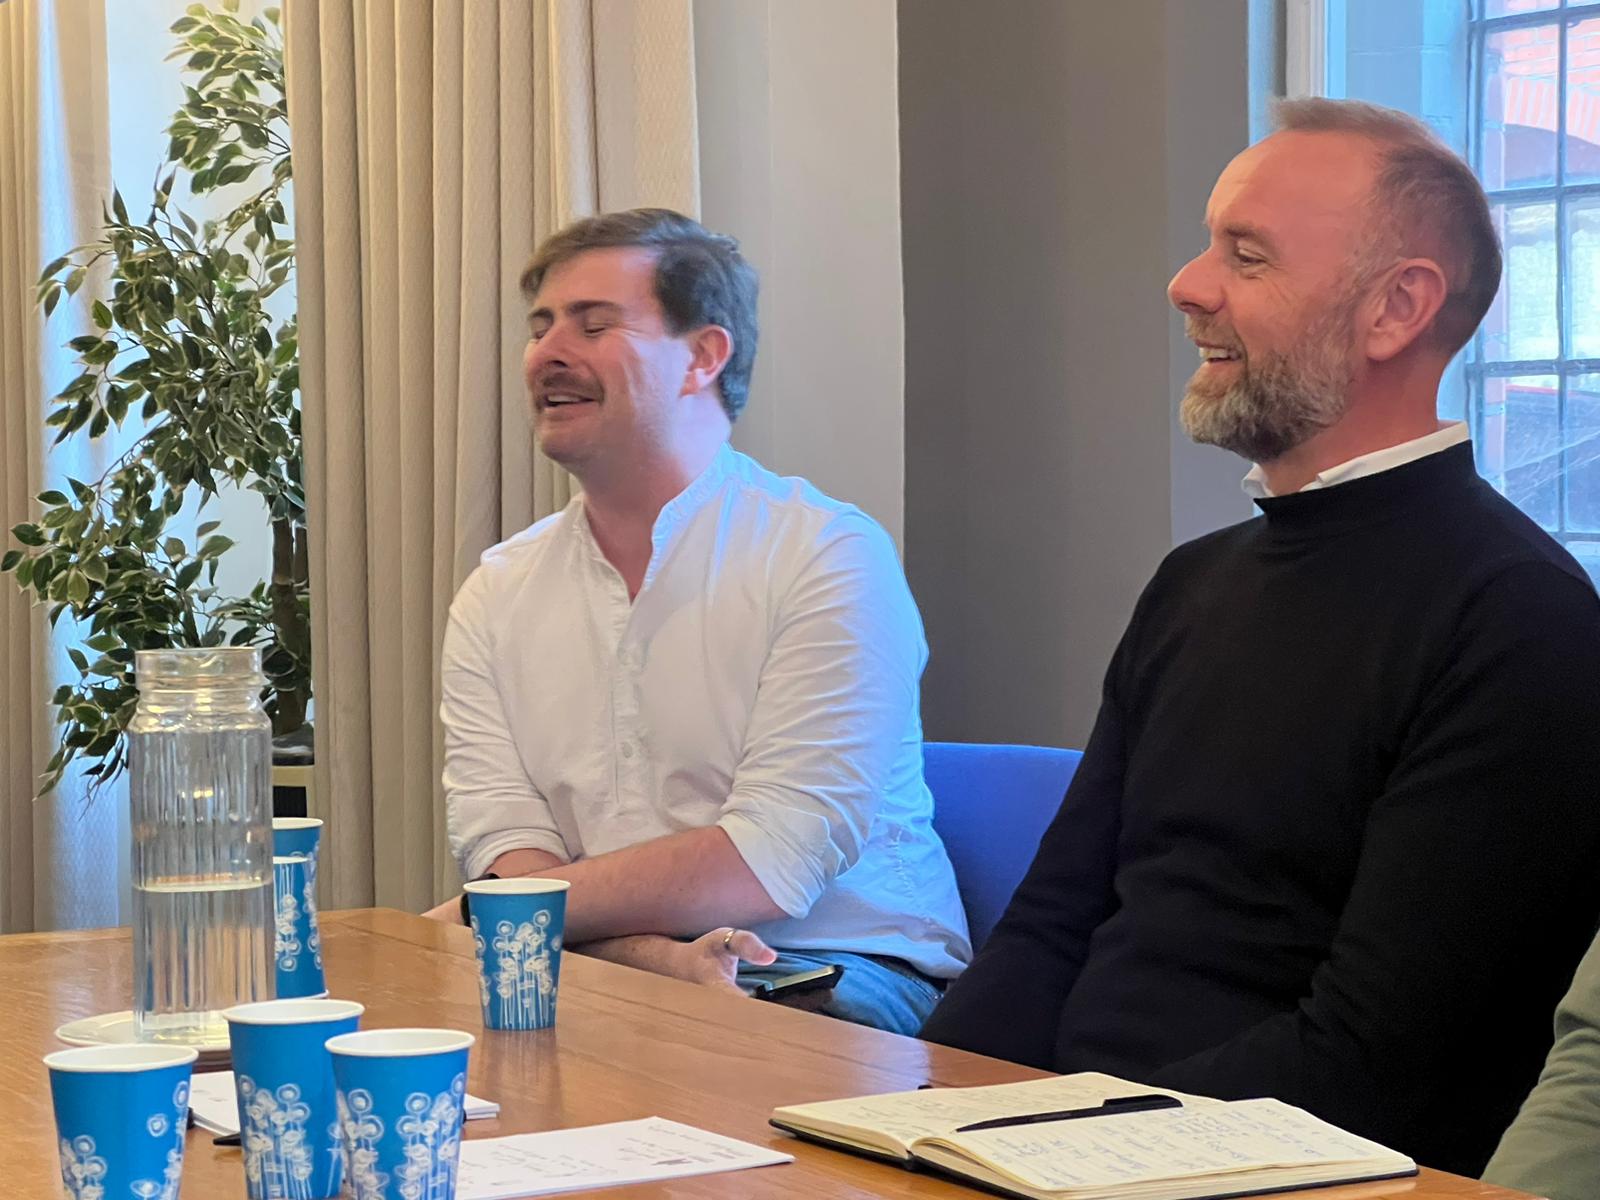 Paul Gallagher, Global Accessibility Leader at Proctor and Gamble and Oran McAlistair, Client Engagement Officer at NaviLens, pictured looking forwards, smiling. They are seated.